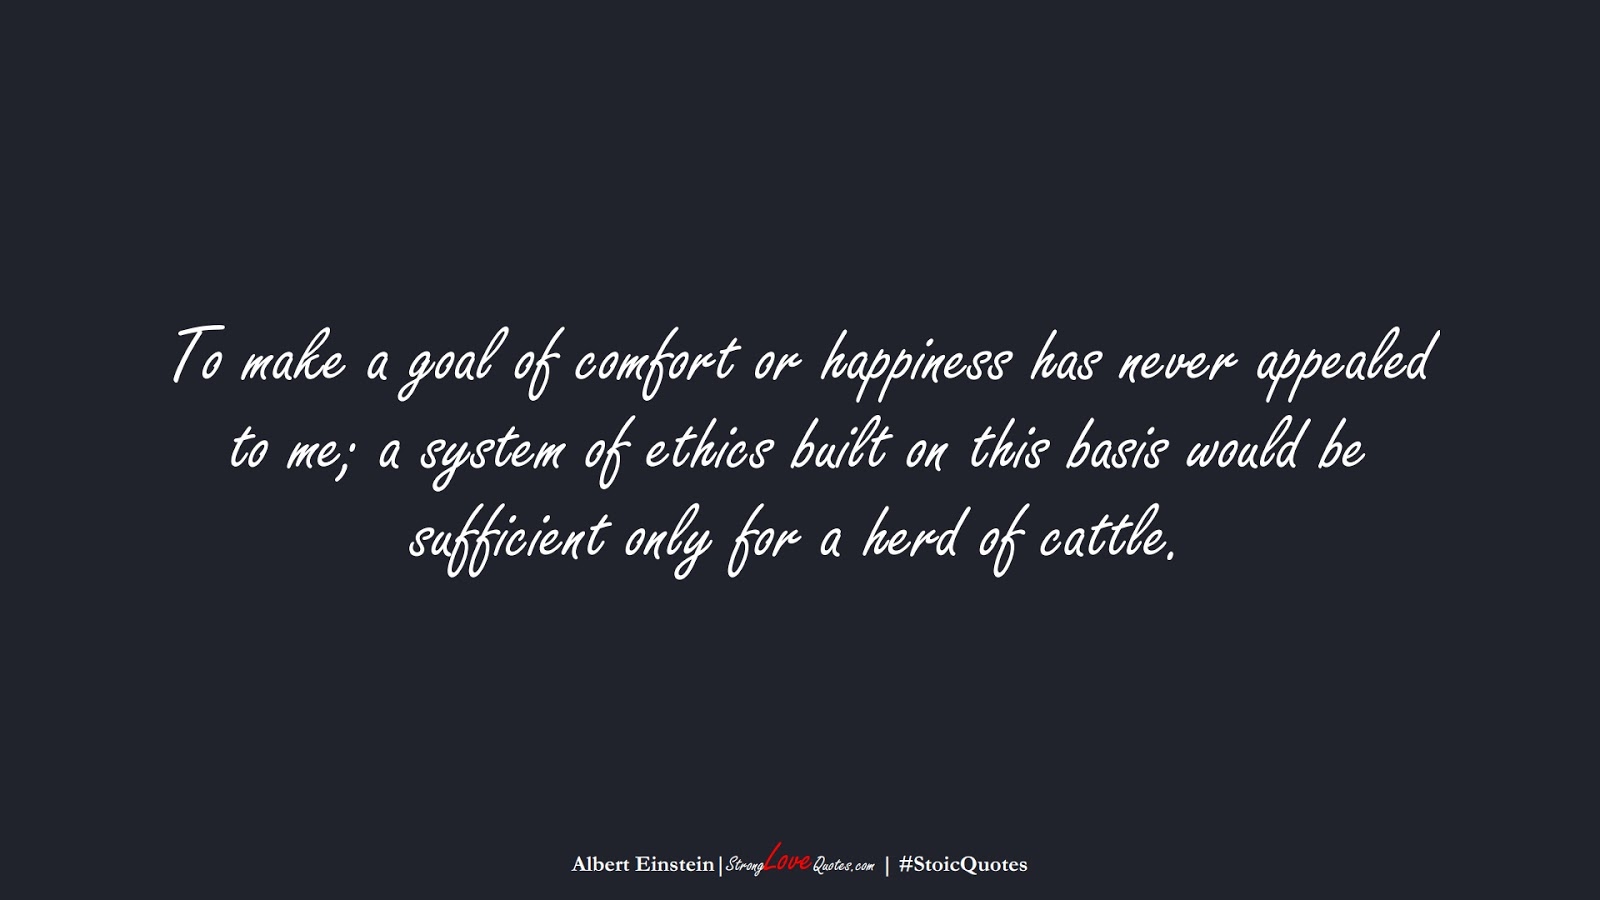 To make a goal of comfort or happiness has never appealed to me; a system of ethics built on this basis would be sufficient only for a herd of cattle. (Albert Einstein);  #StoicQuotes